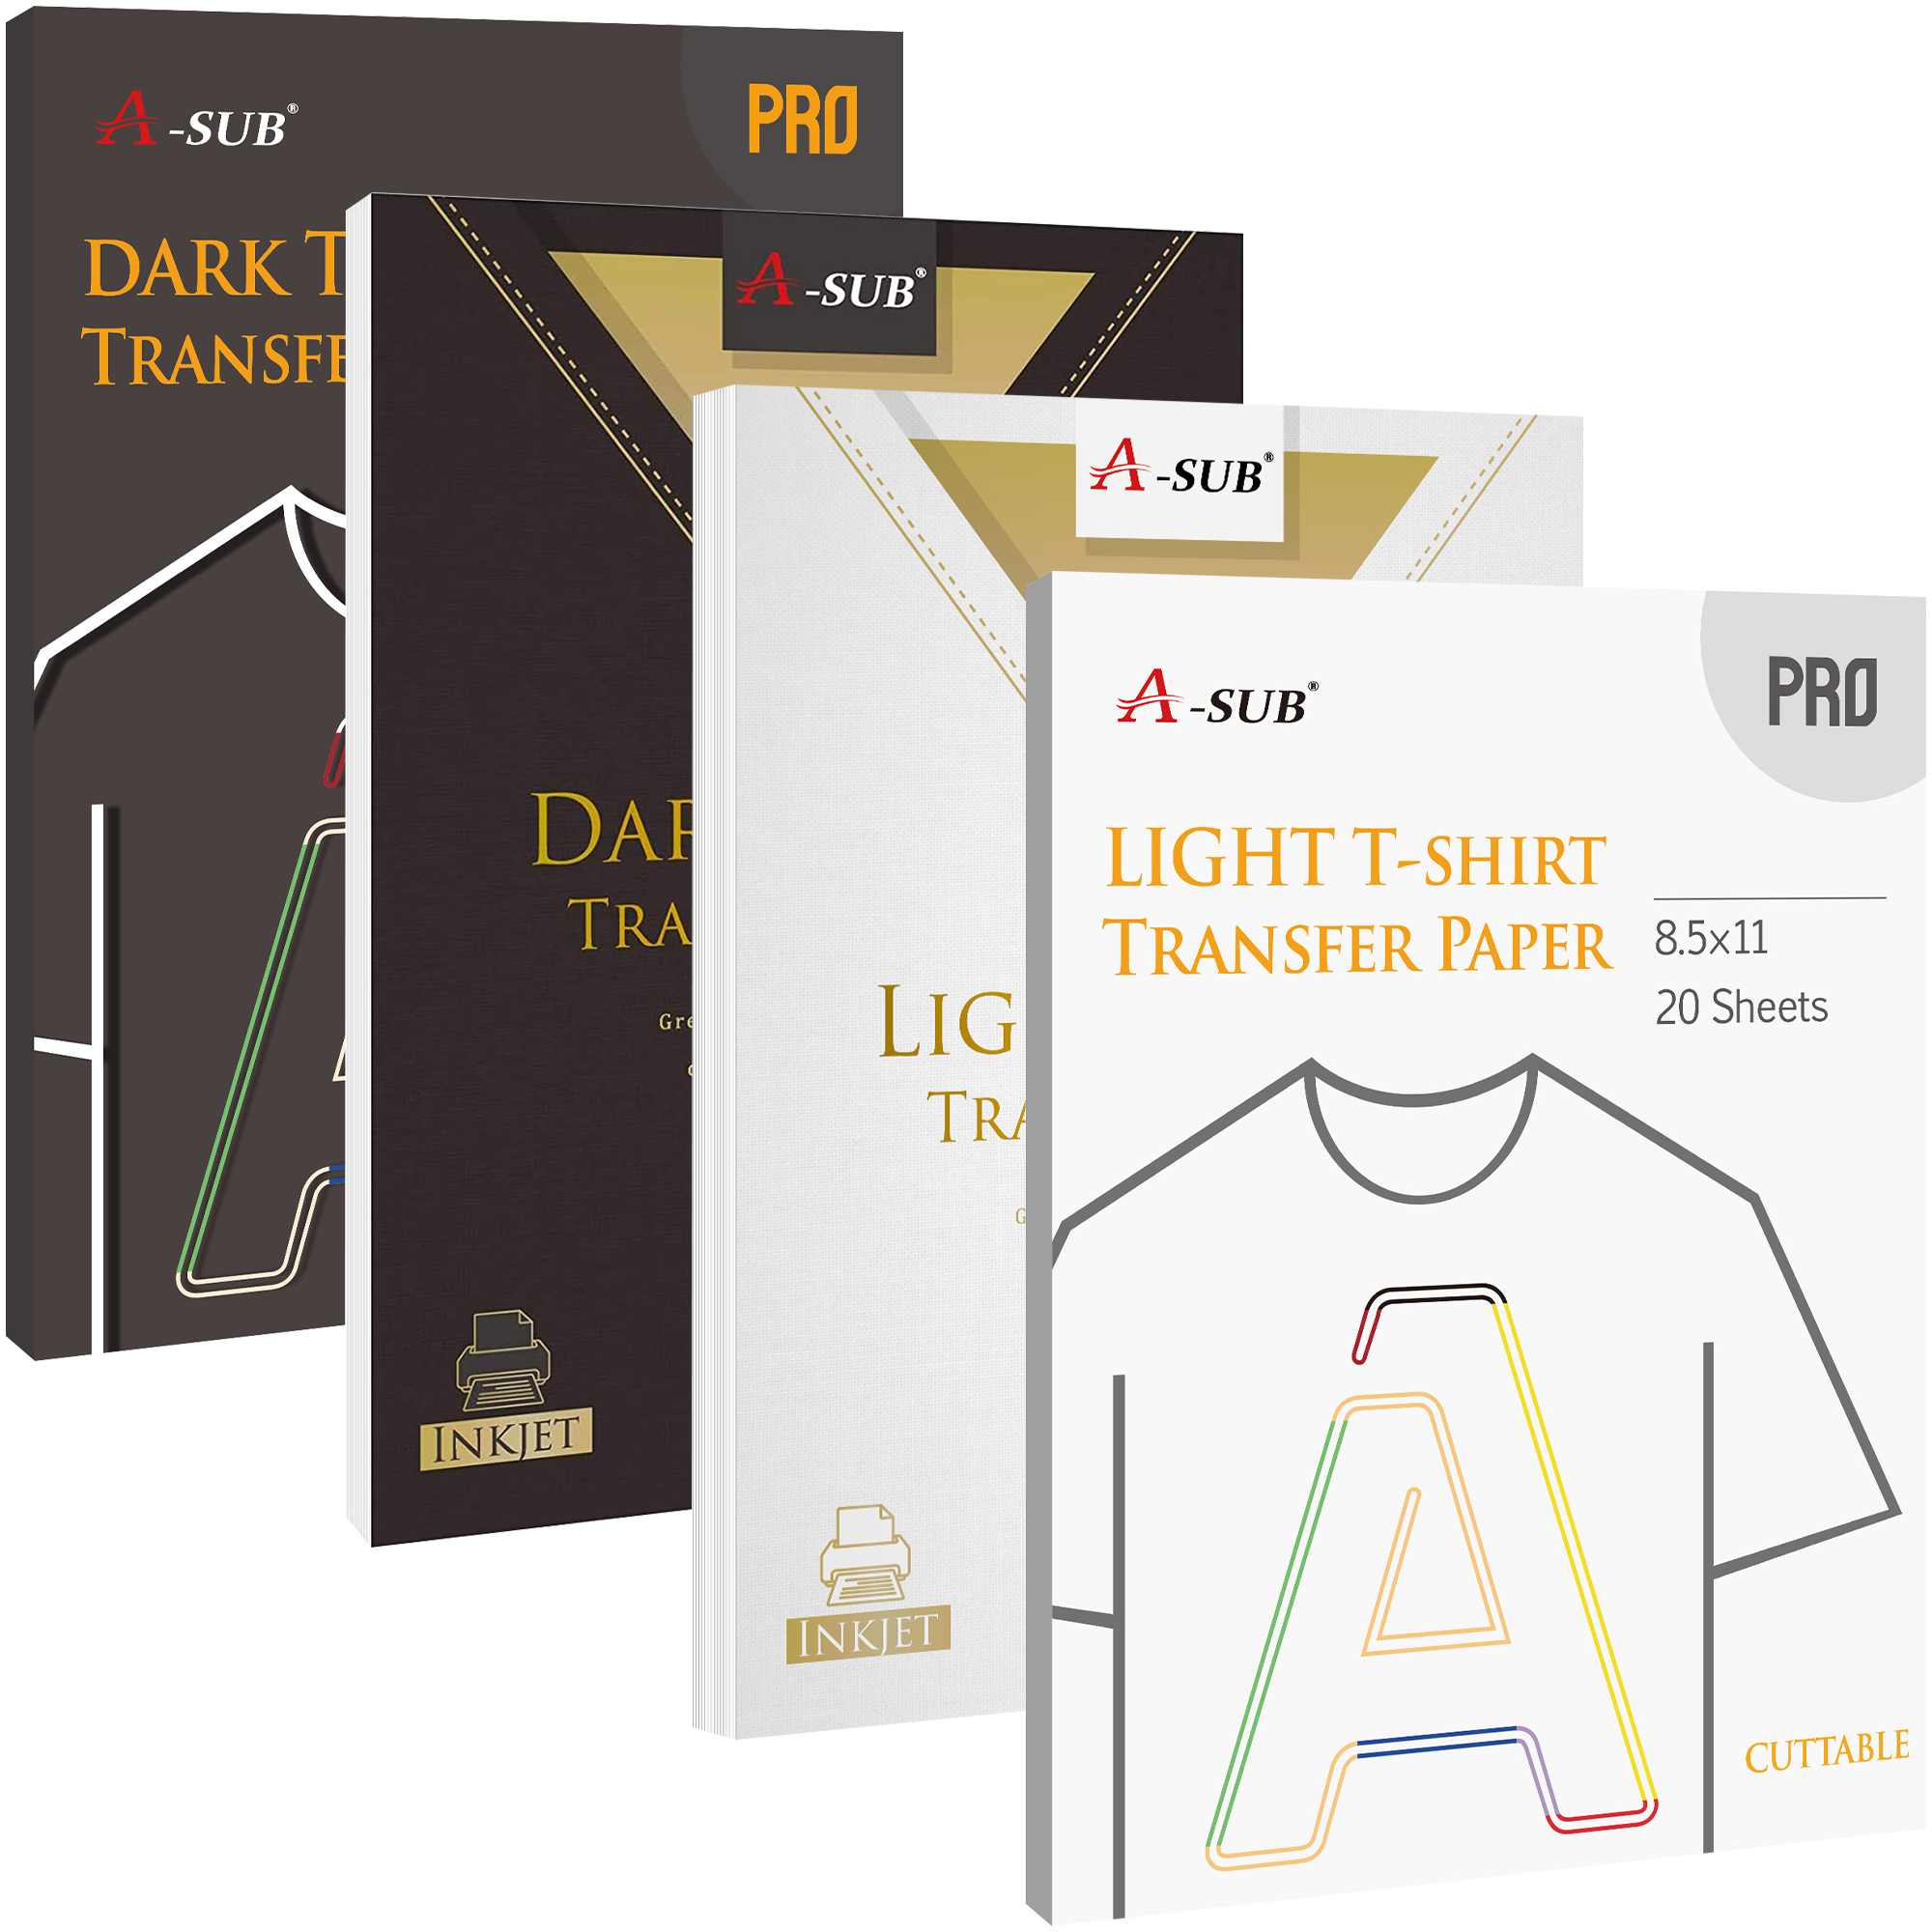 A-sub Pro Inkjet Iron-On Dark Transfer Paper for Fabrics 8.5x11 25 Sheets, Printable Heat Transfer Vinyl Paper for Dark/Black T-shirts Work with